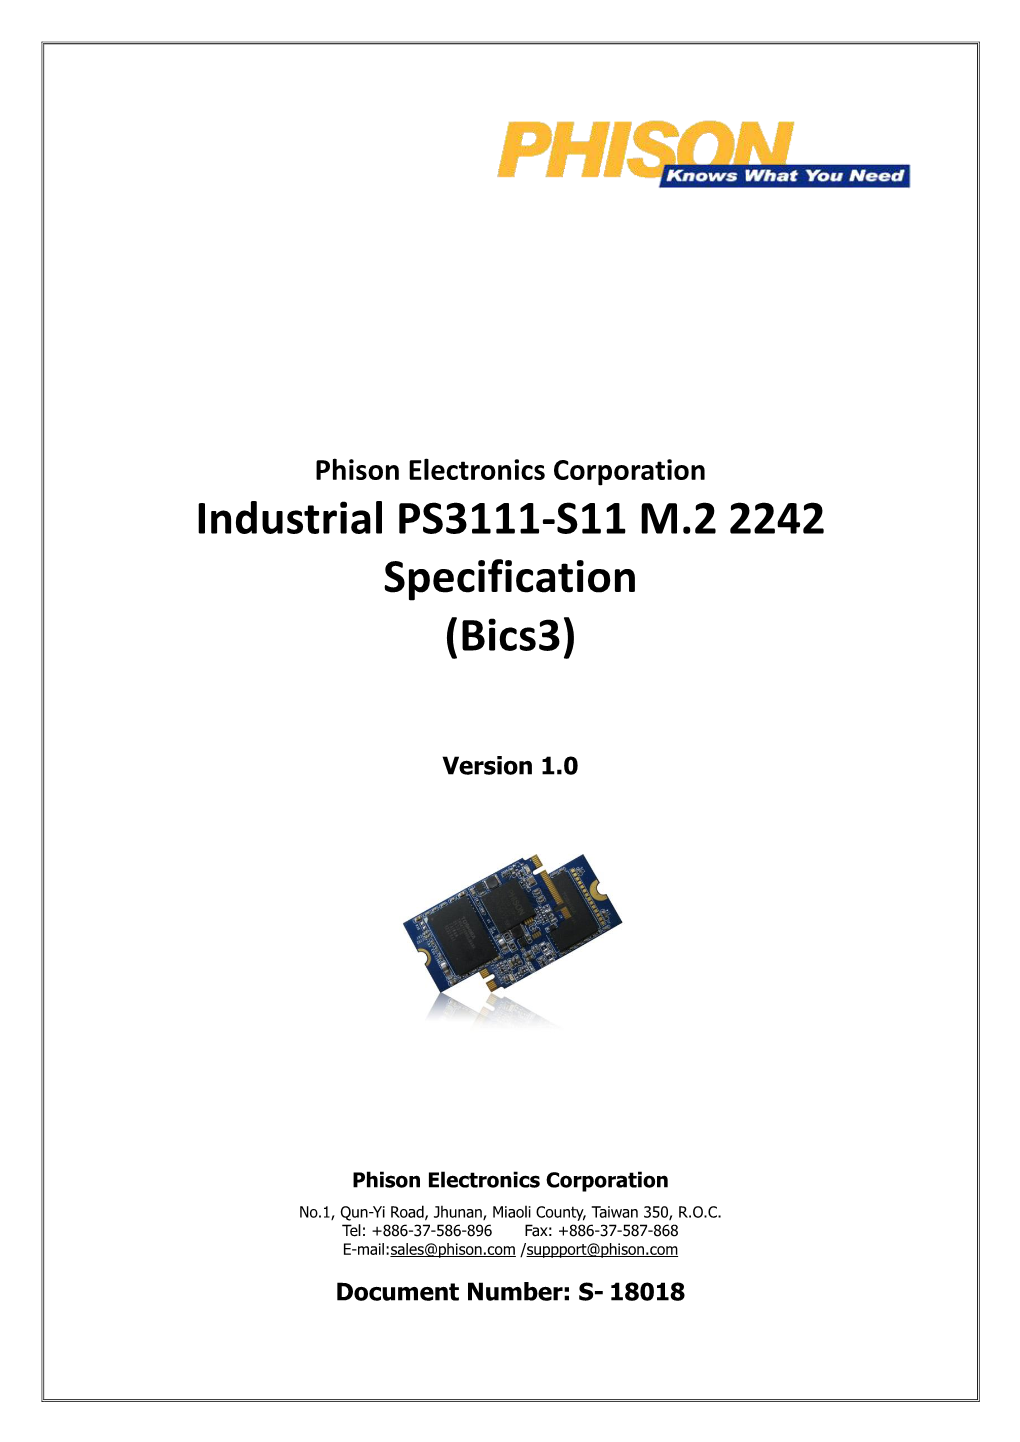 Industrial PS3111-S11 M.2 2242 Specification (Bics3)